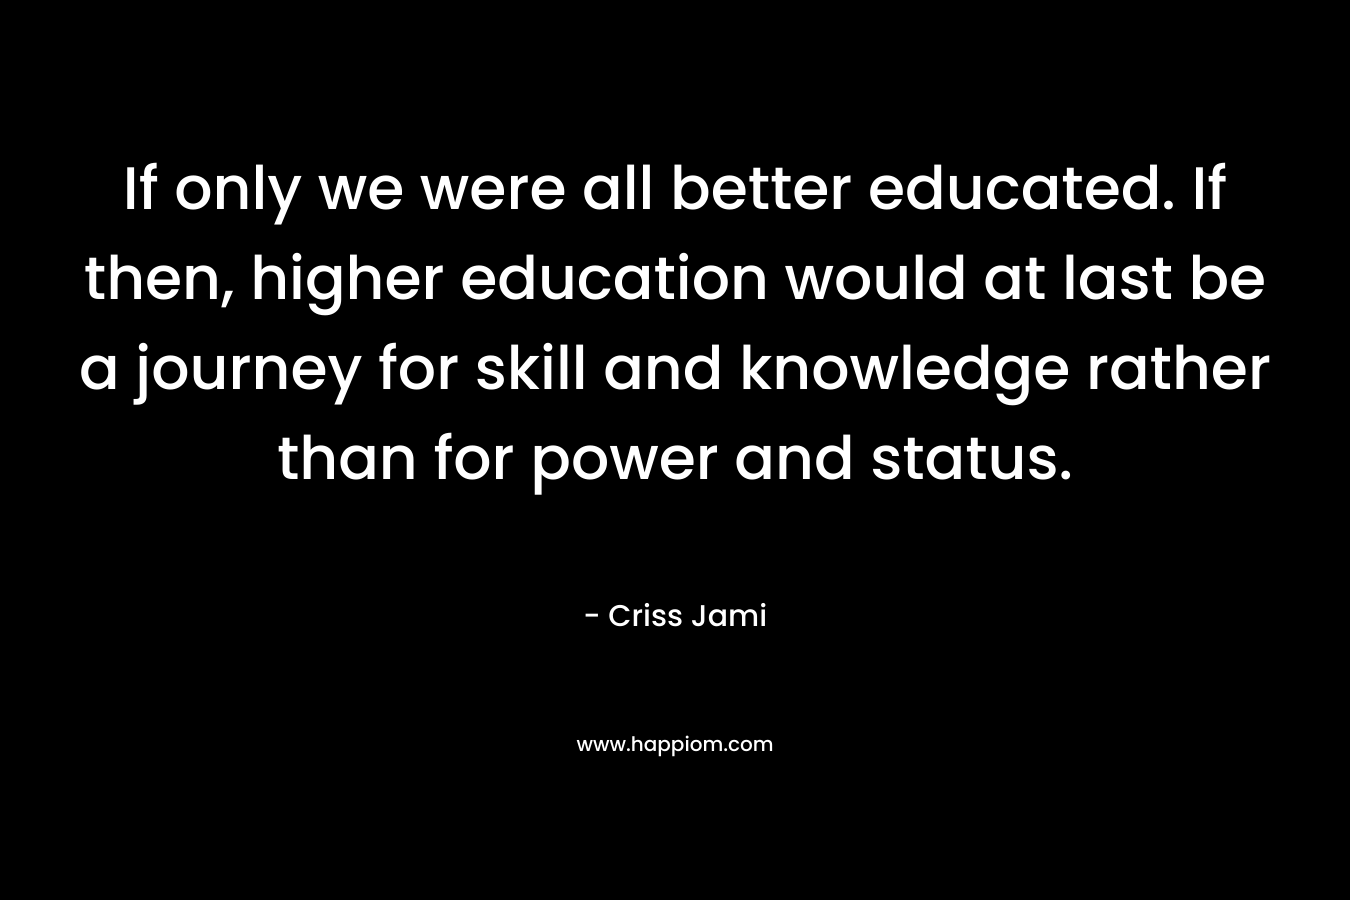 If only we were all better educated. If then, higher education would at last be a journey for skill and knowledge rather than for power and status.